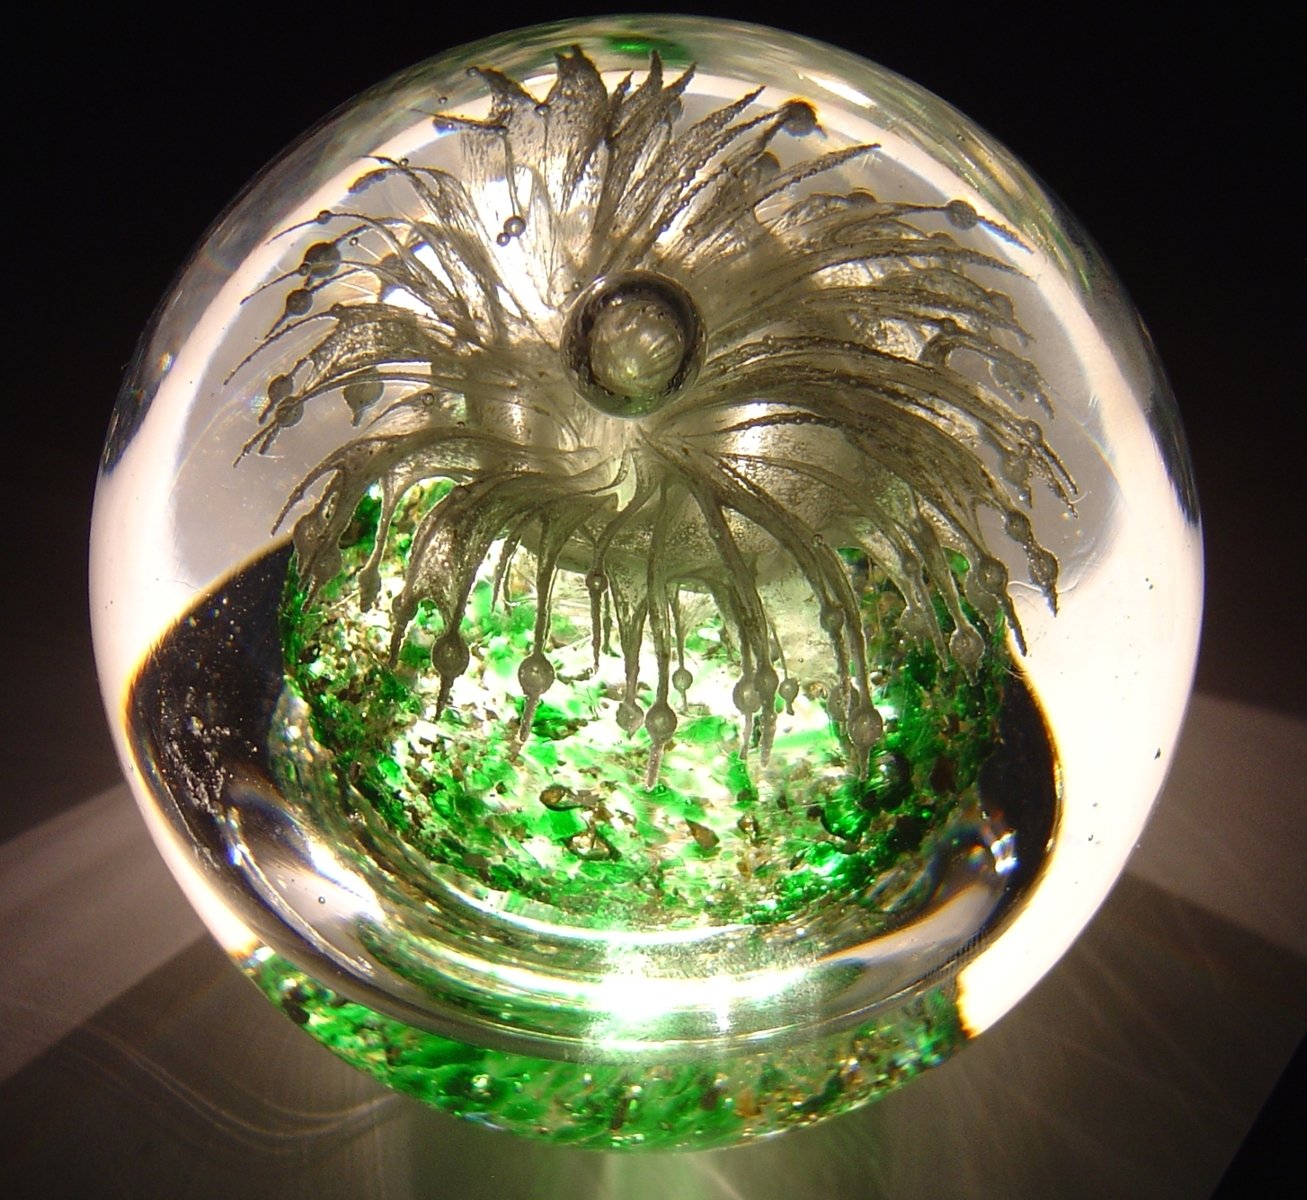 green and white things inside of a glass bowl